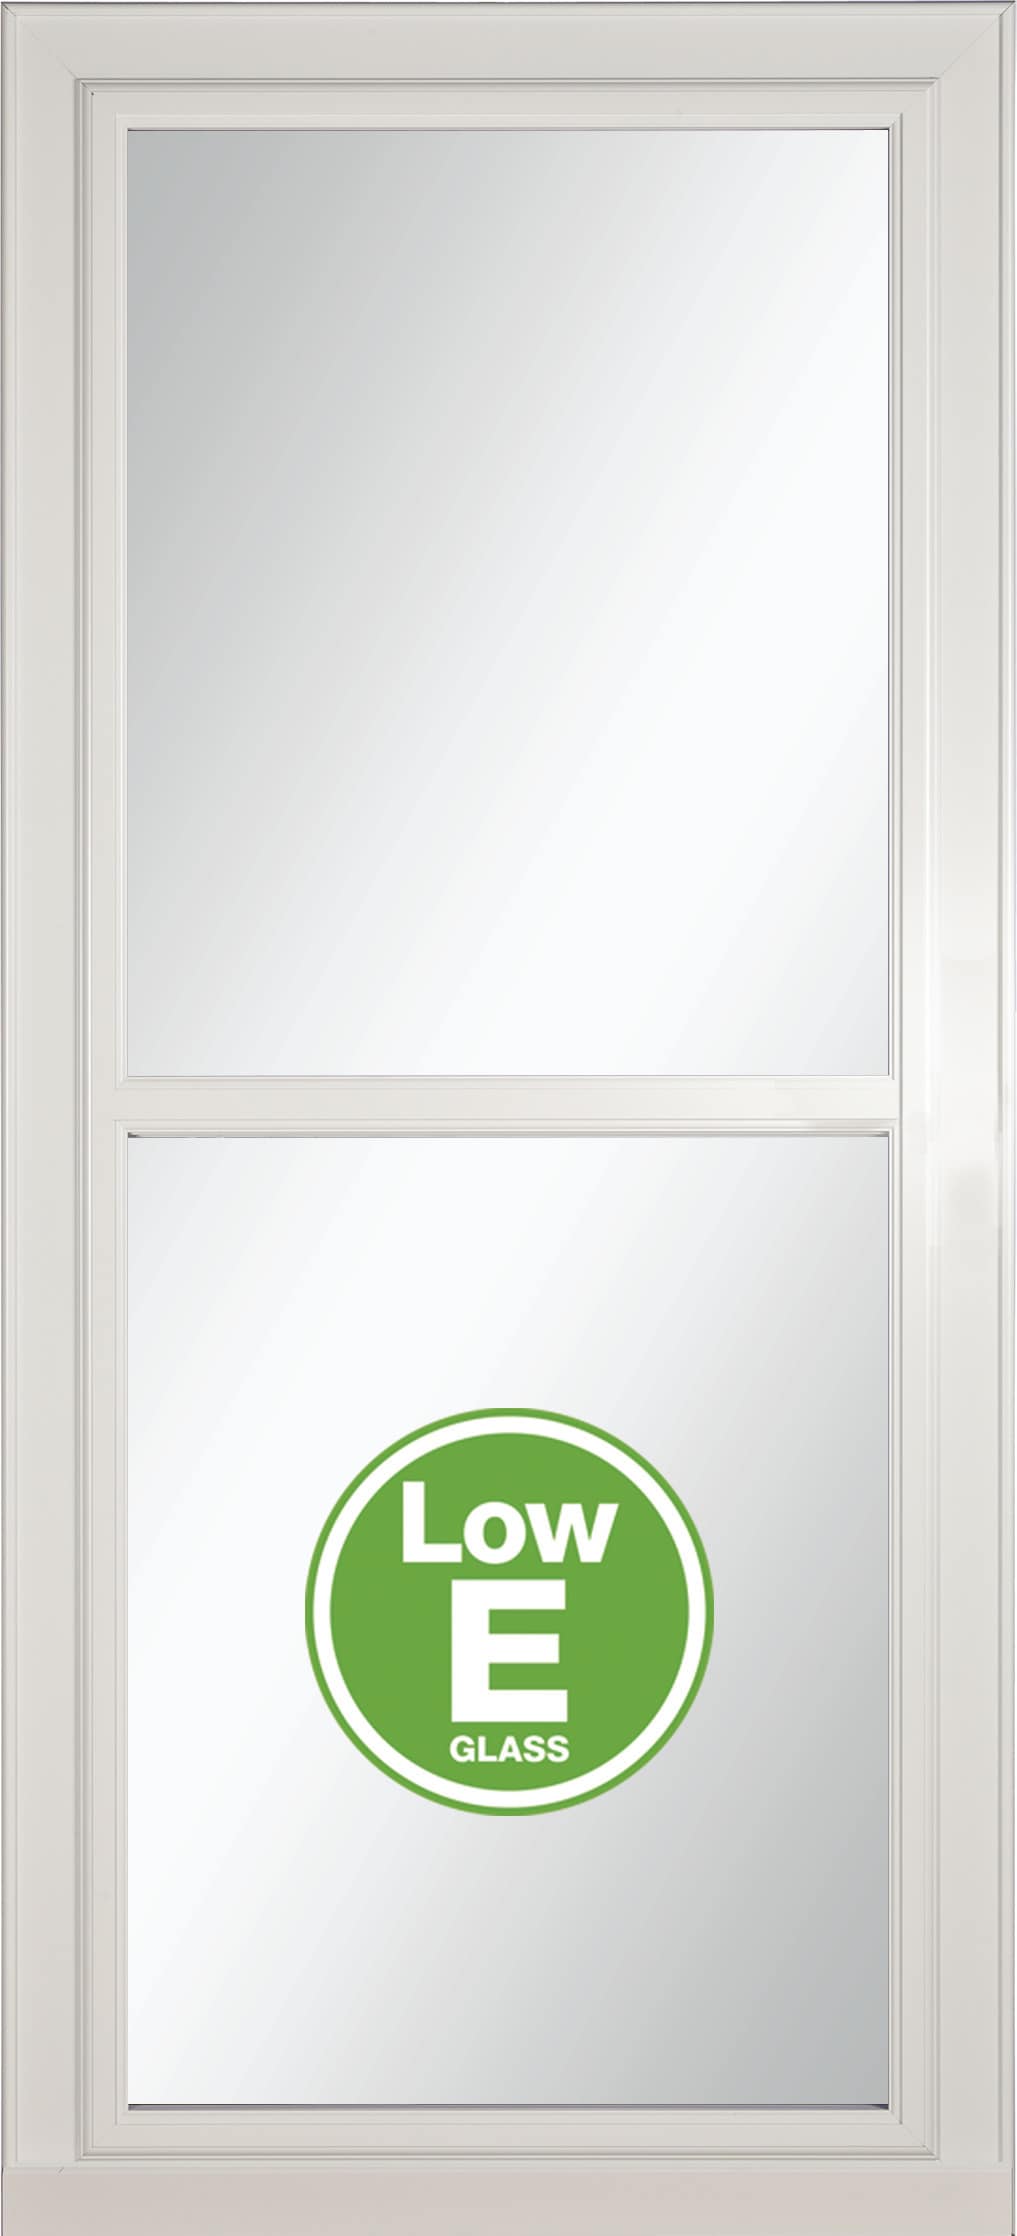 Tradewinds Selection Low-E 36-in x 81-in White Full-view Retractable Screen Aluminum Storm Door | - LARSON 14604032E